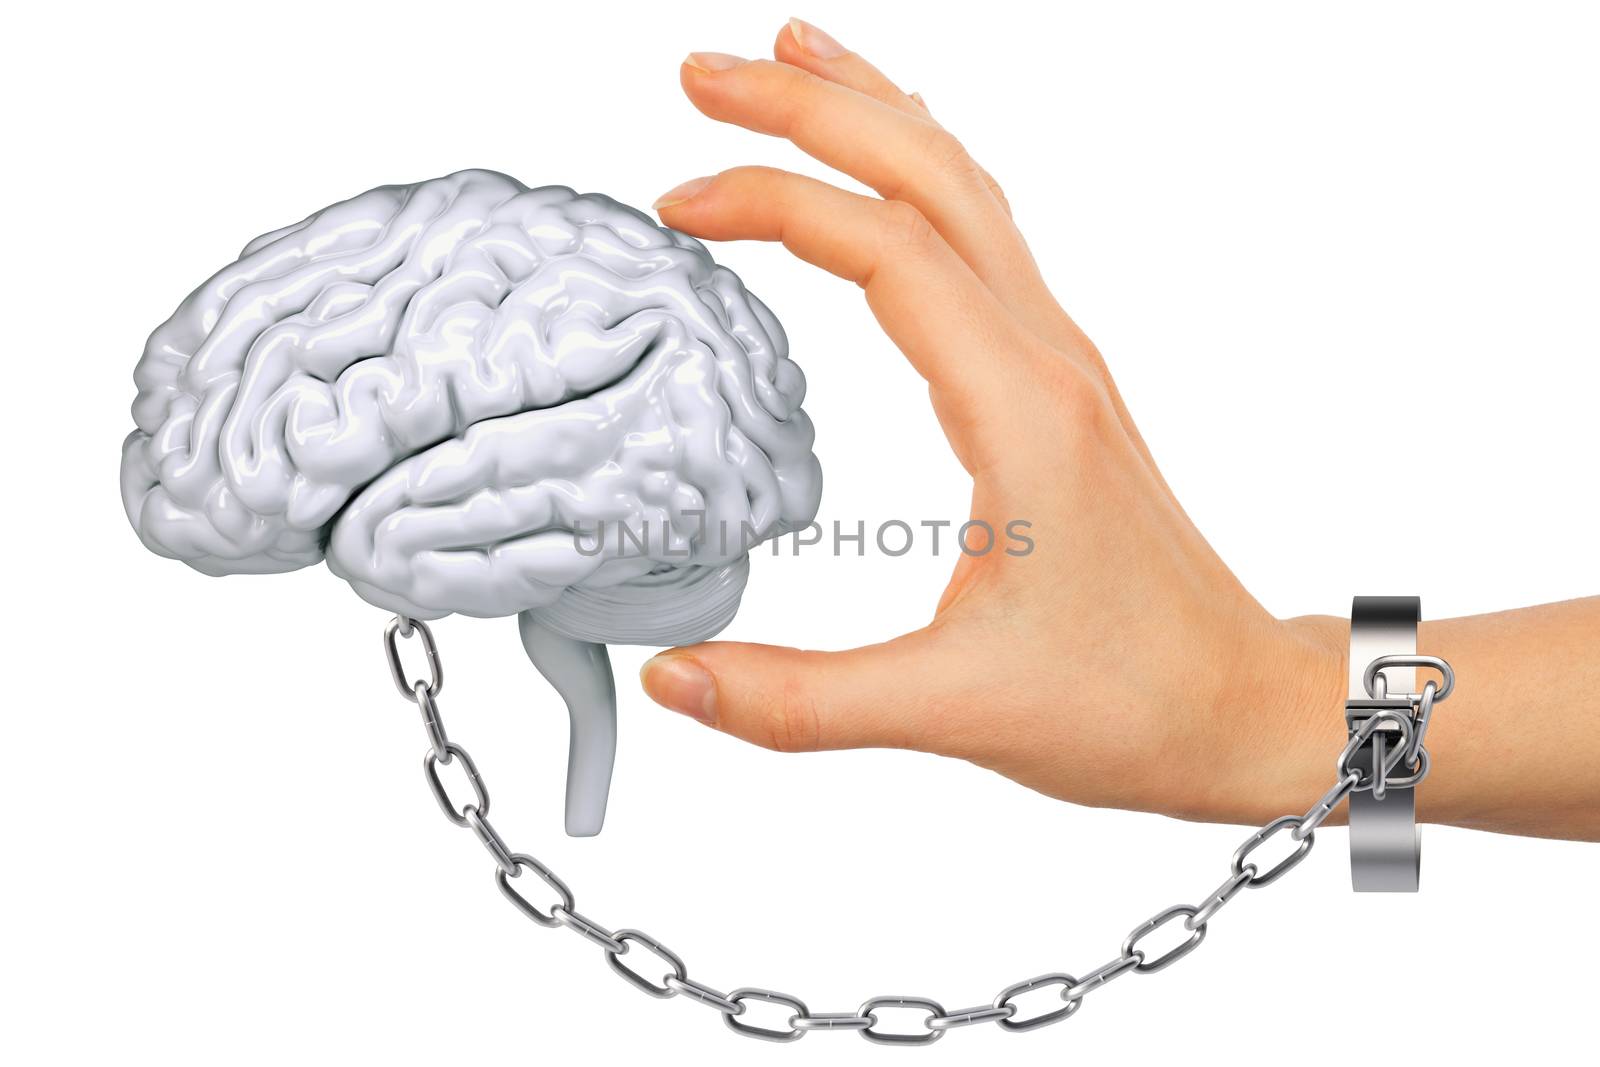 Chained hand holding human brain isolated on white background